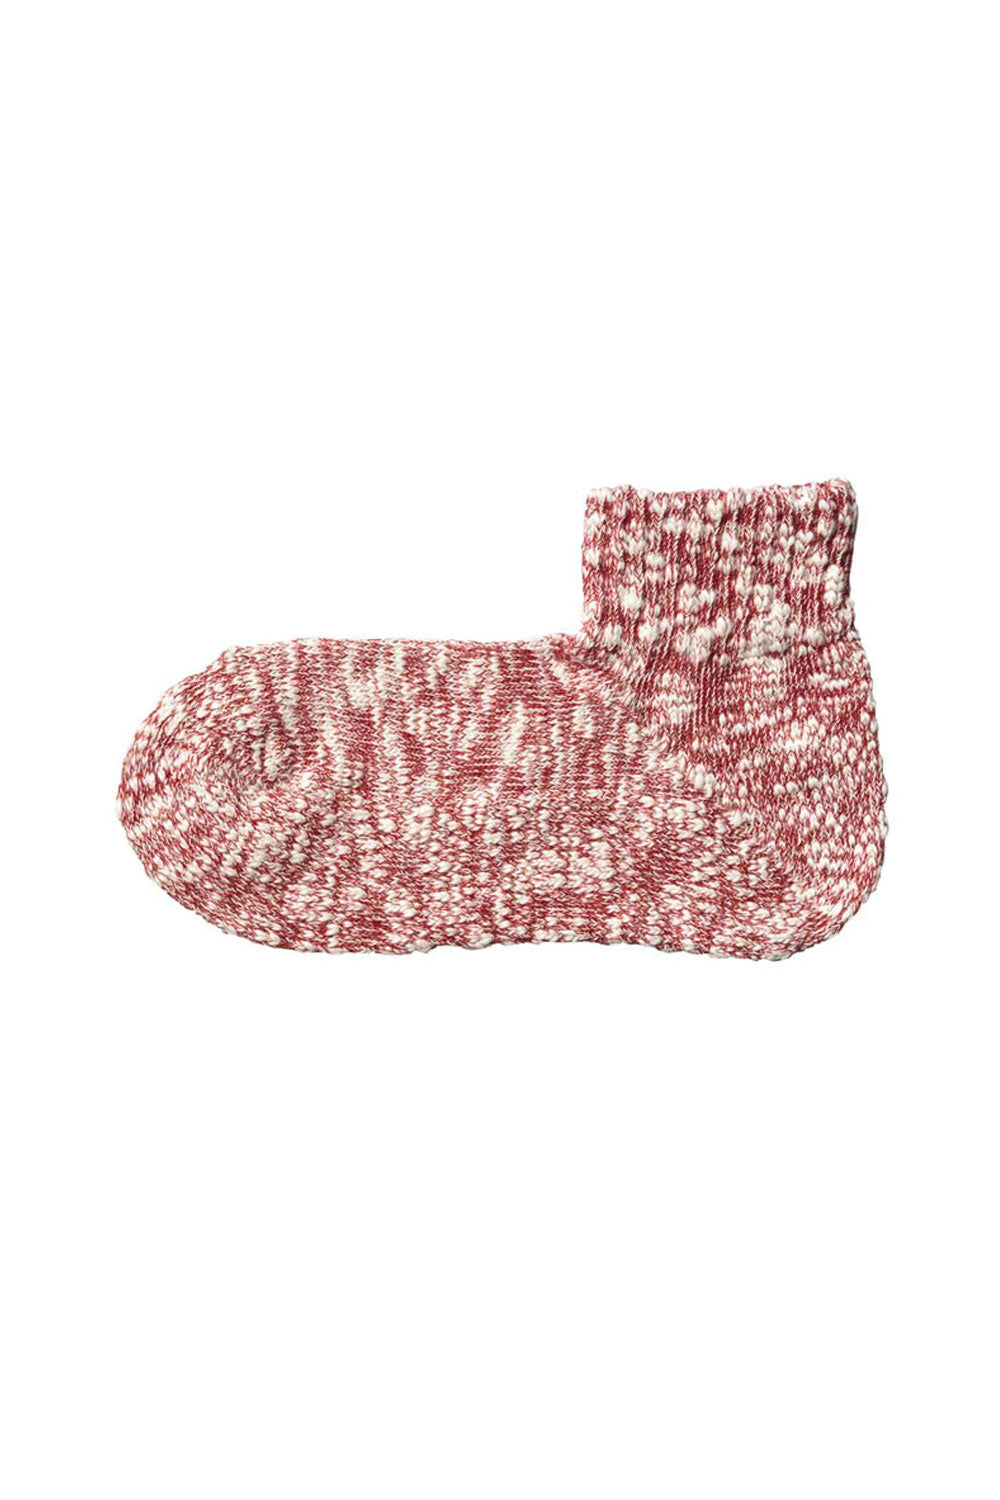 The SNOW PEAK - GARA GARA SOCK  available online with global shipping, and in PAM Stores Melbourne and Sydney.